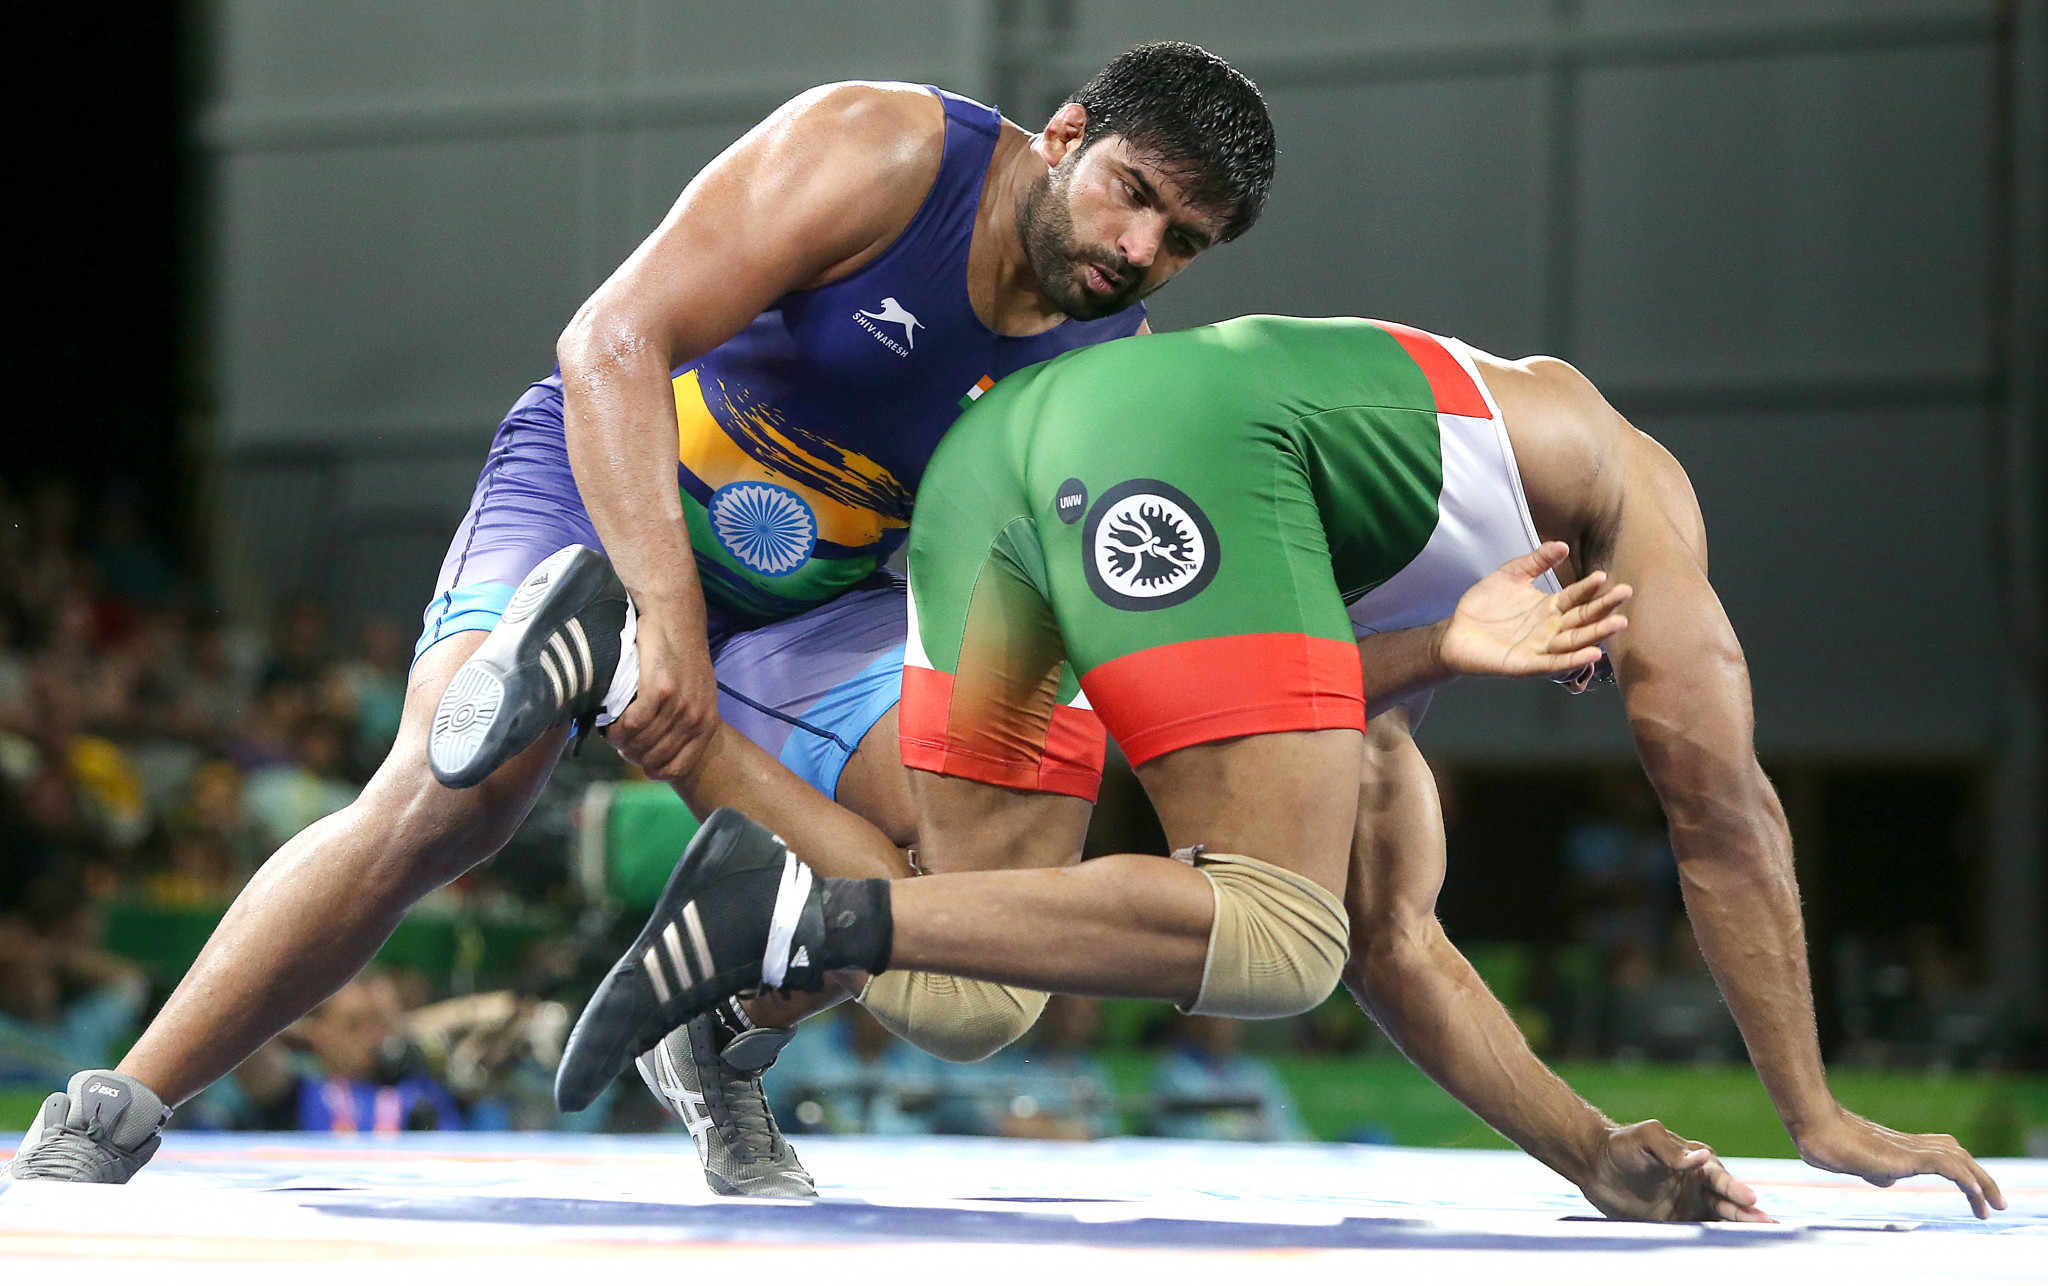 India's Sumit came out on top in the men's 125kg freestyle category ©Getty Images